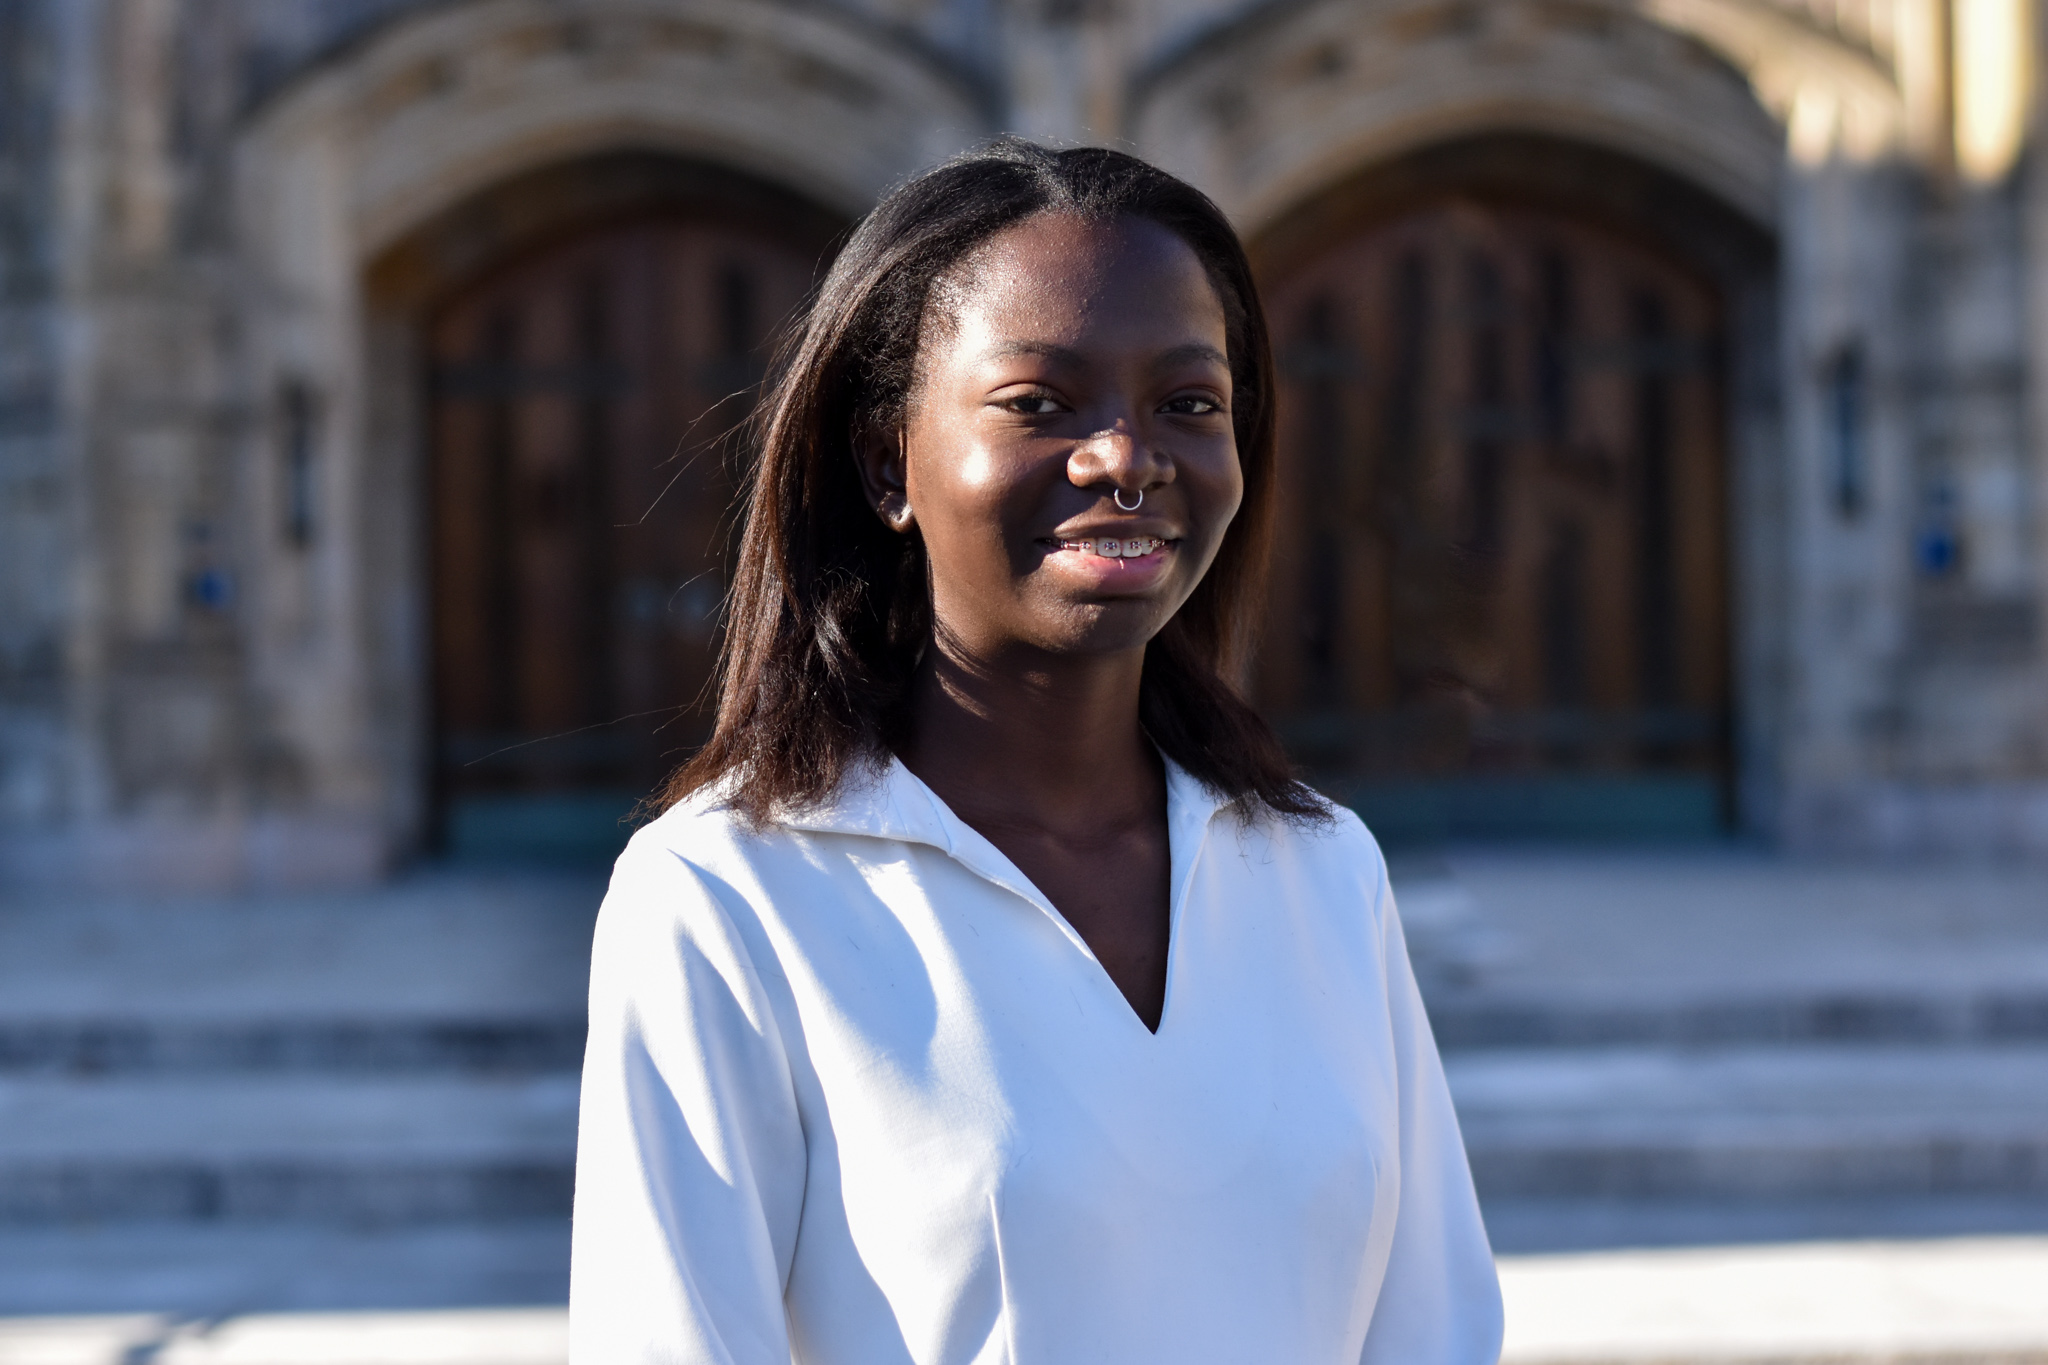 Aderonke - a person with dark brown skin, shoulder length brown hair, a silver septum ring, and braces - wears a white dress, smiles, and stands in front of Sterling Memorial Library at Yale University.